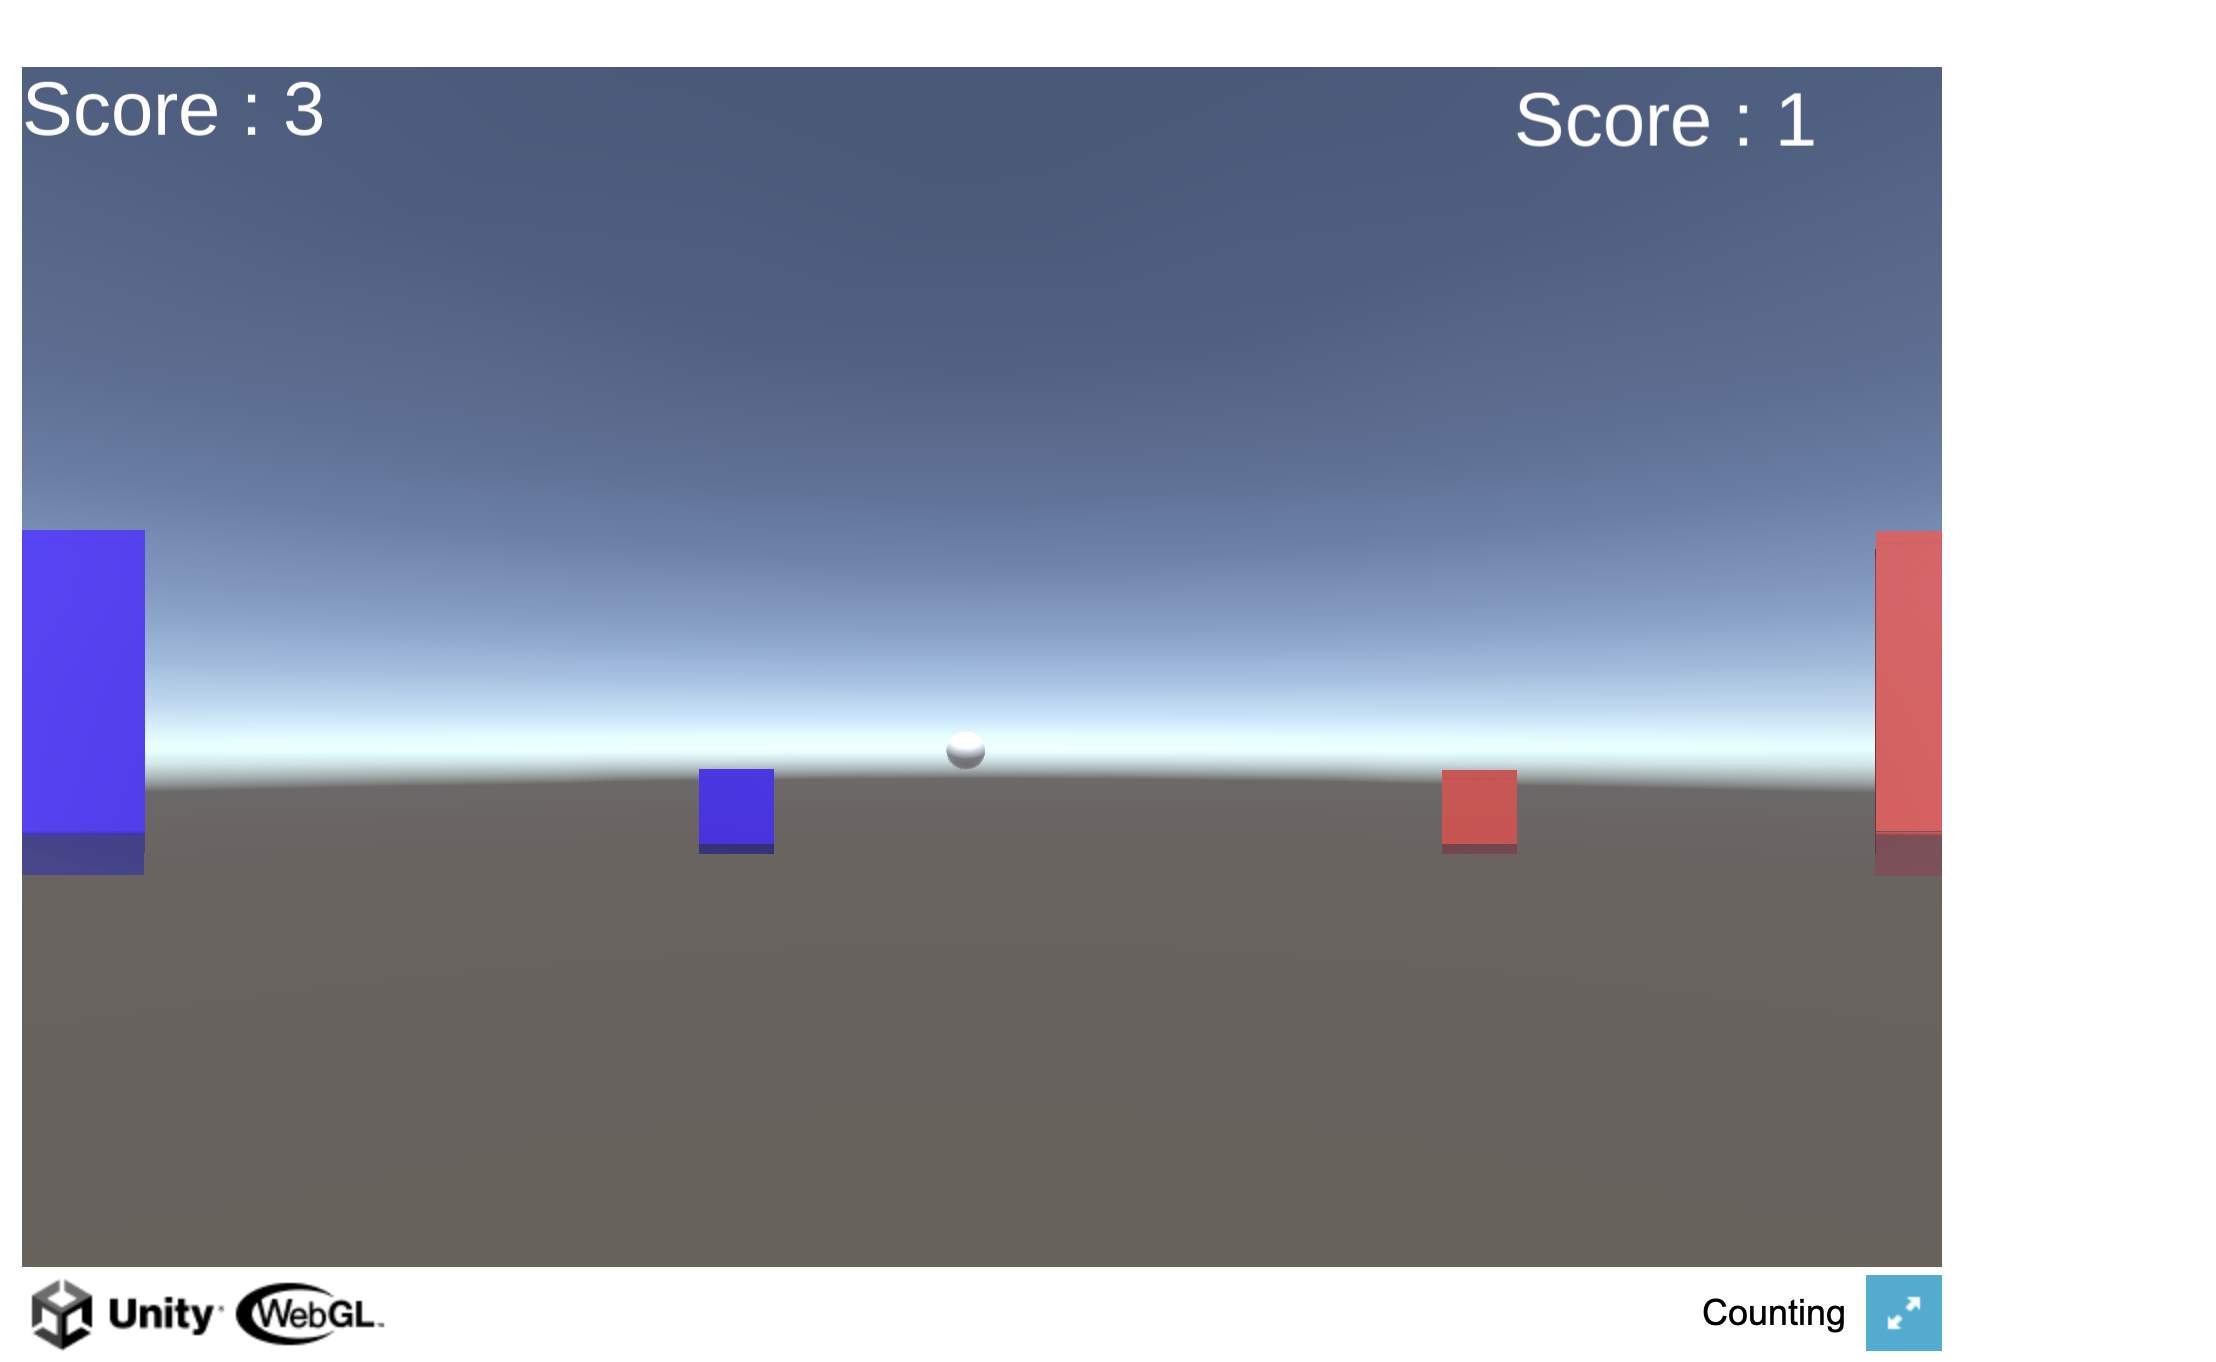 Counting Prototype - 2 Player Soccer